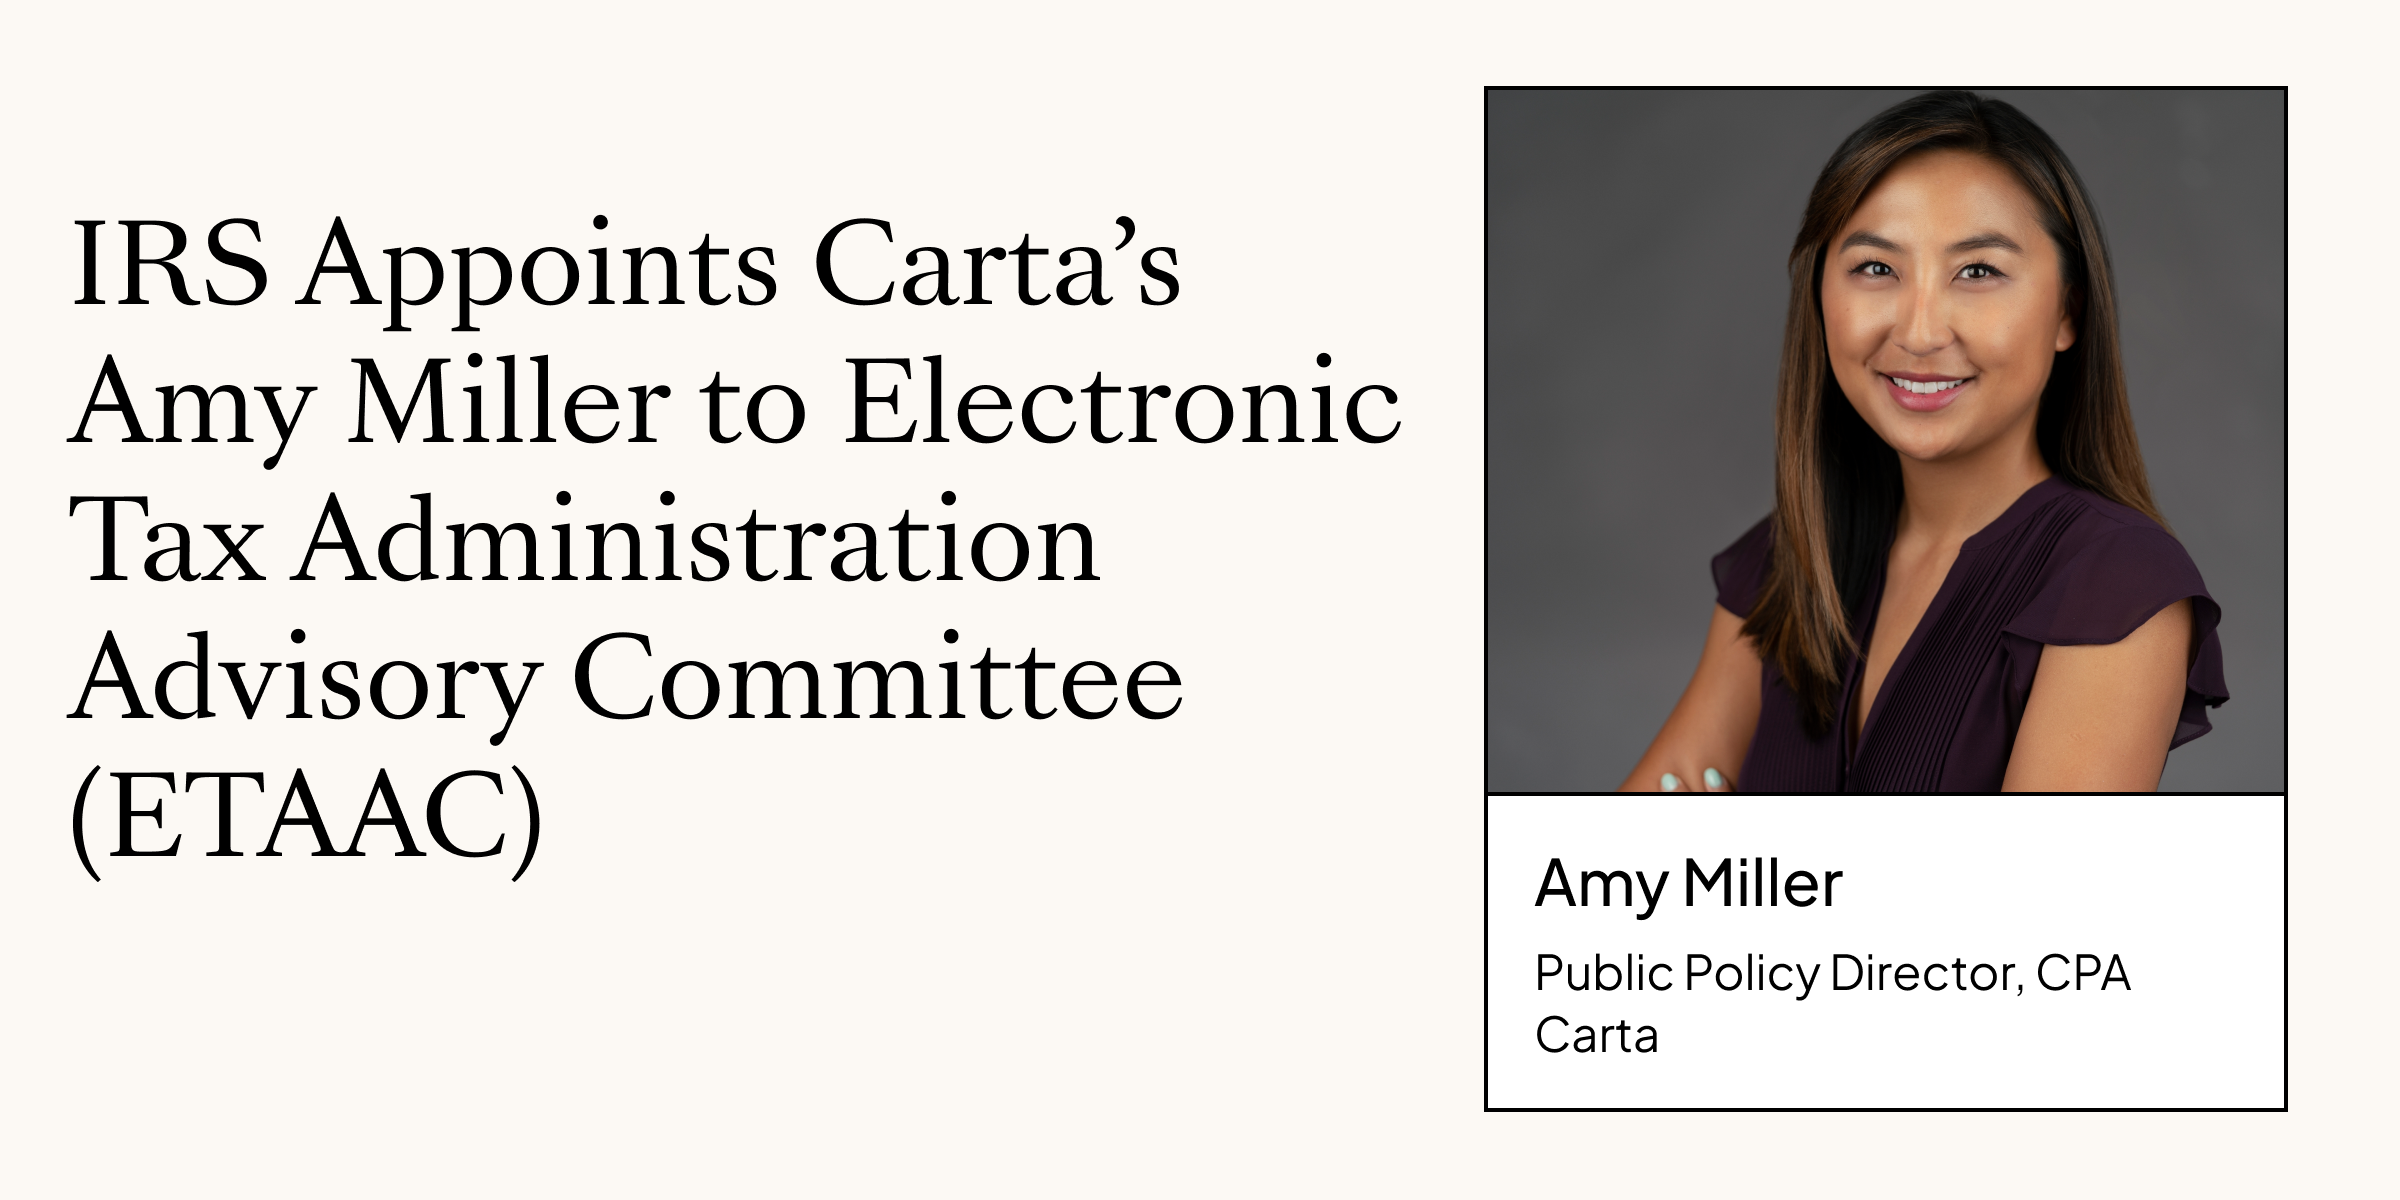 Carta Director of Public Policy, Amy Miller, CPA, appointed to IRS Committee